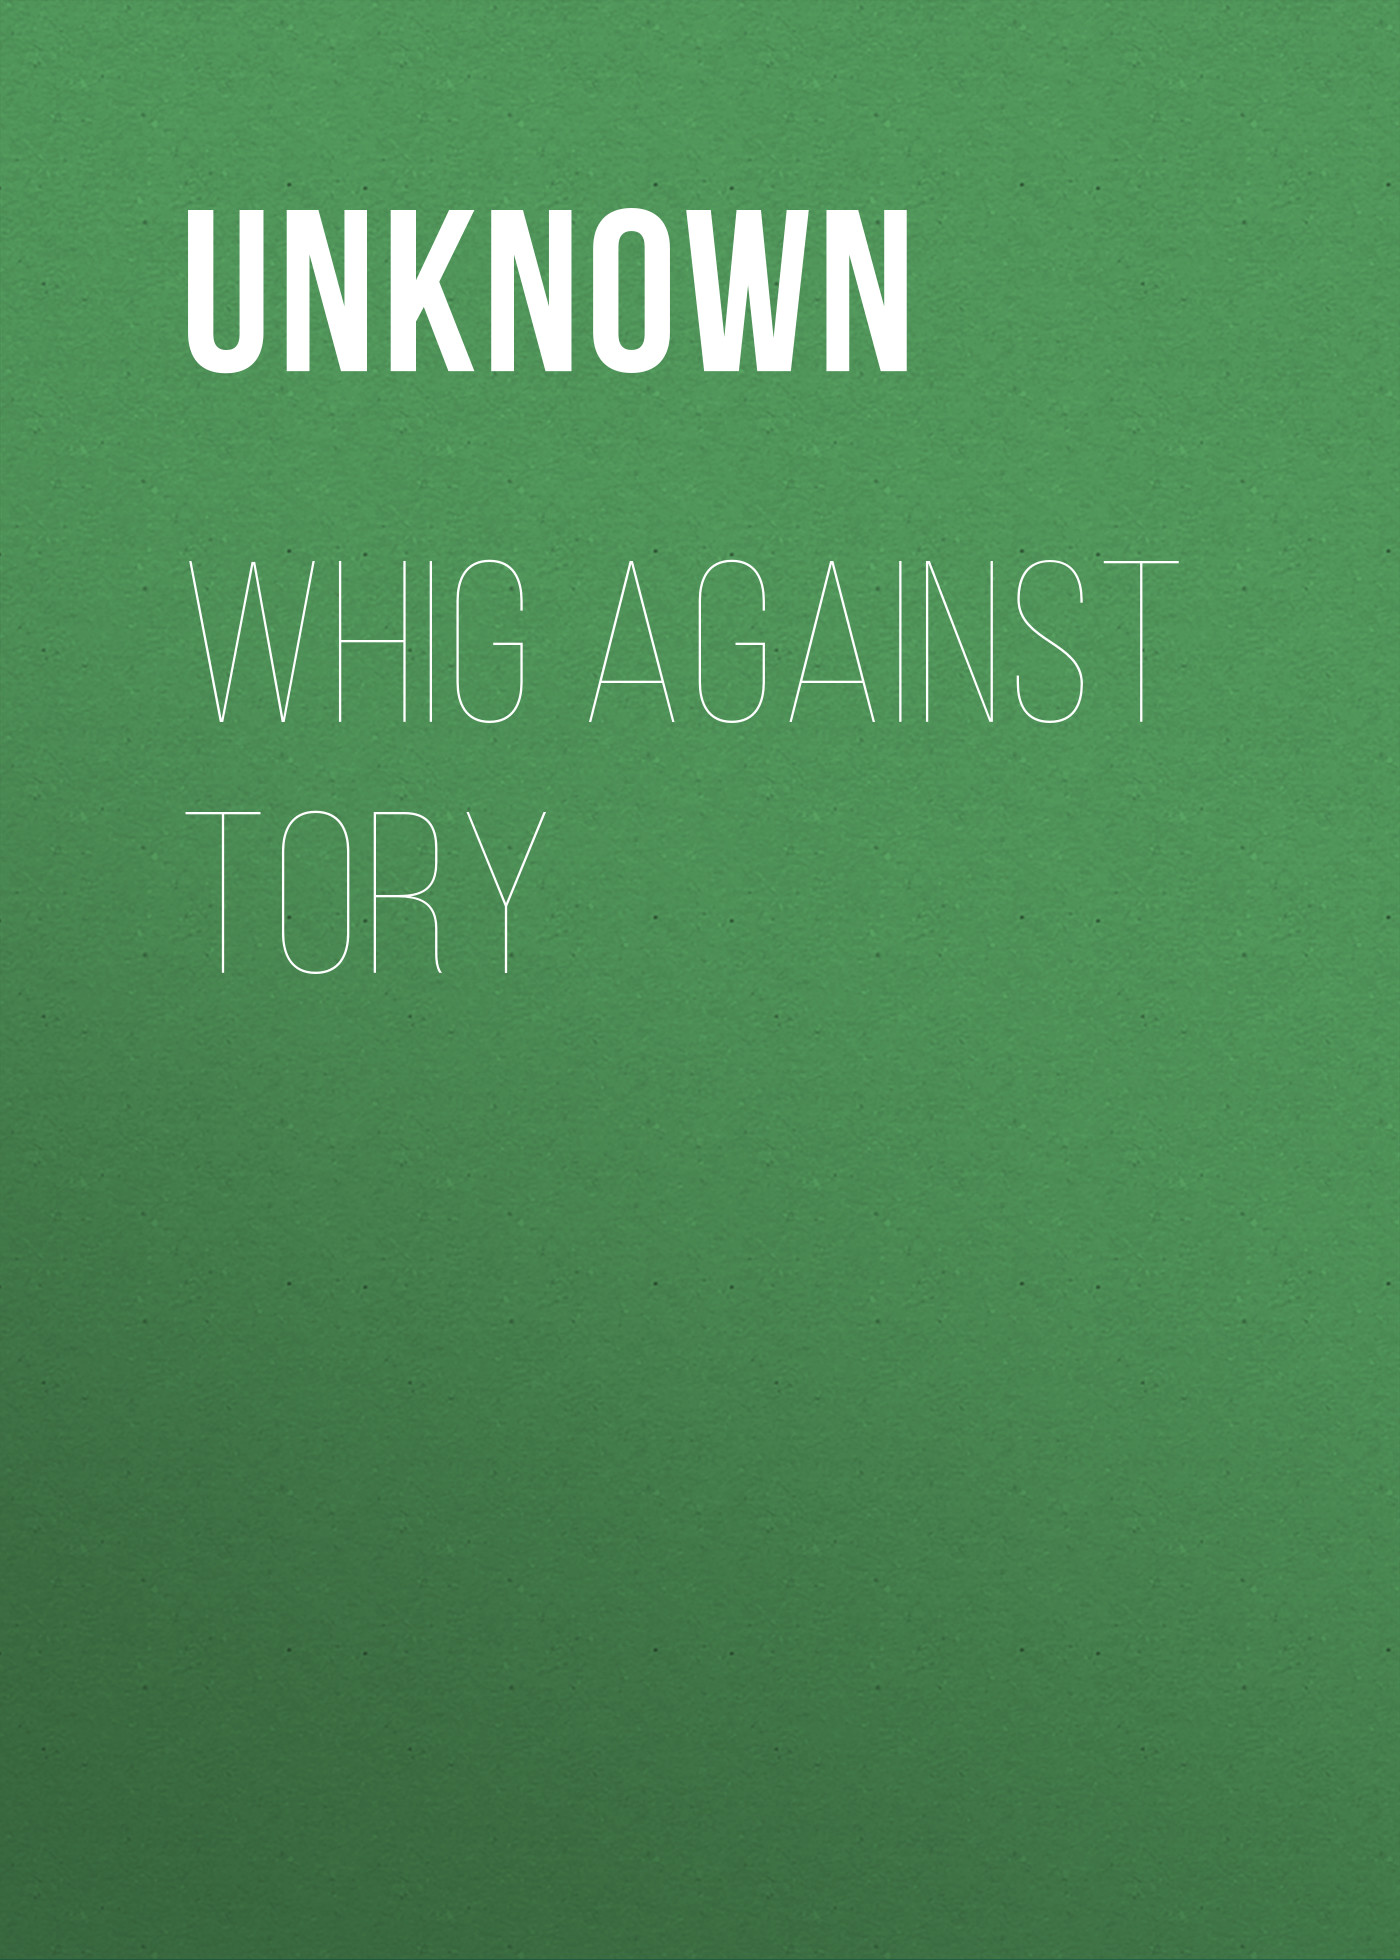 Whig Against Tory